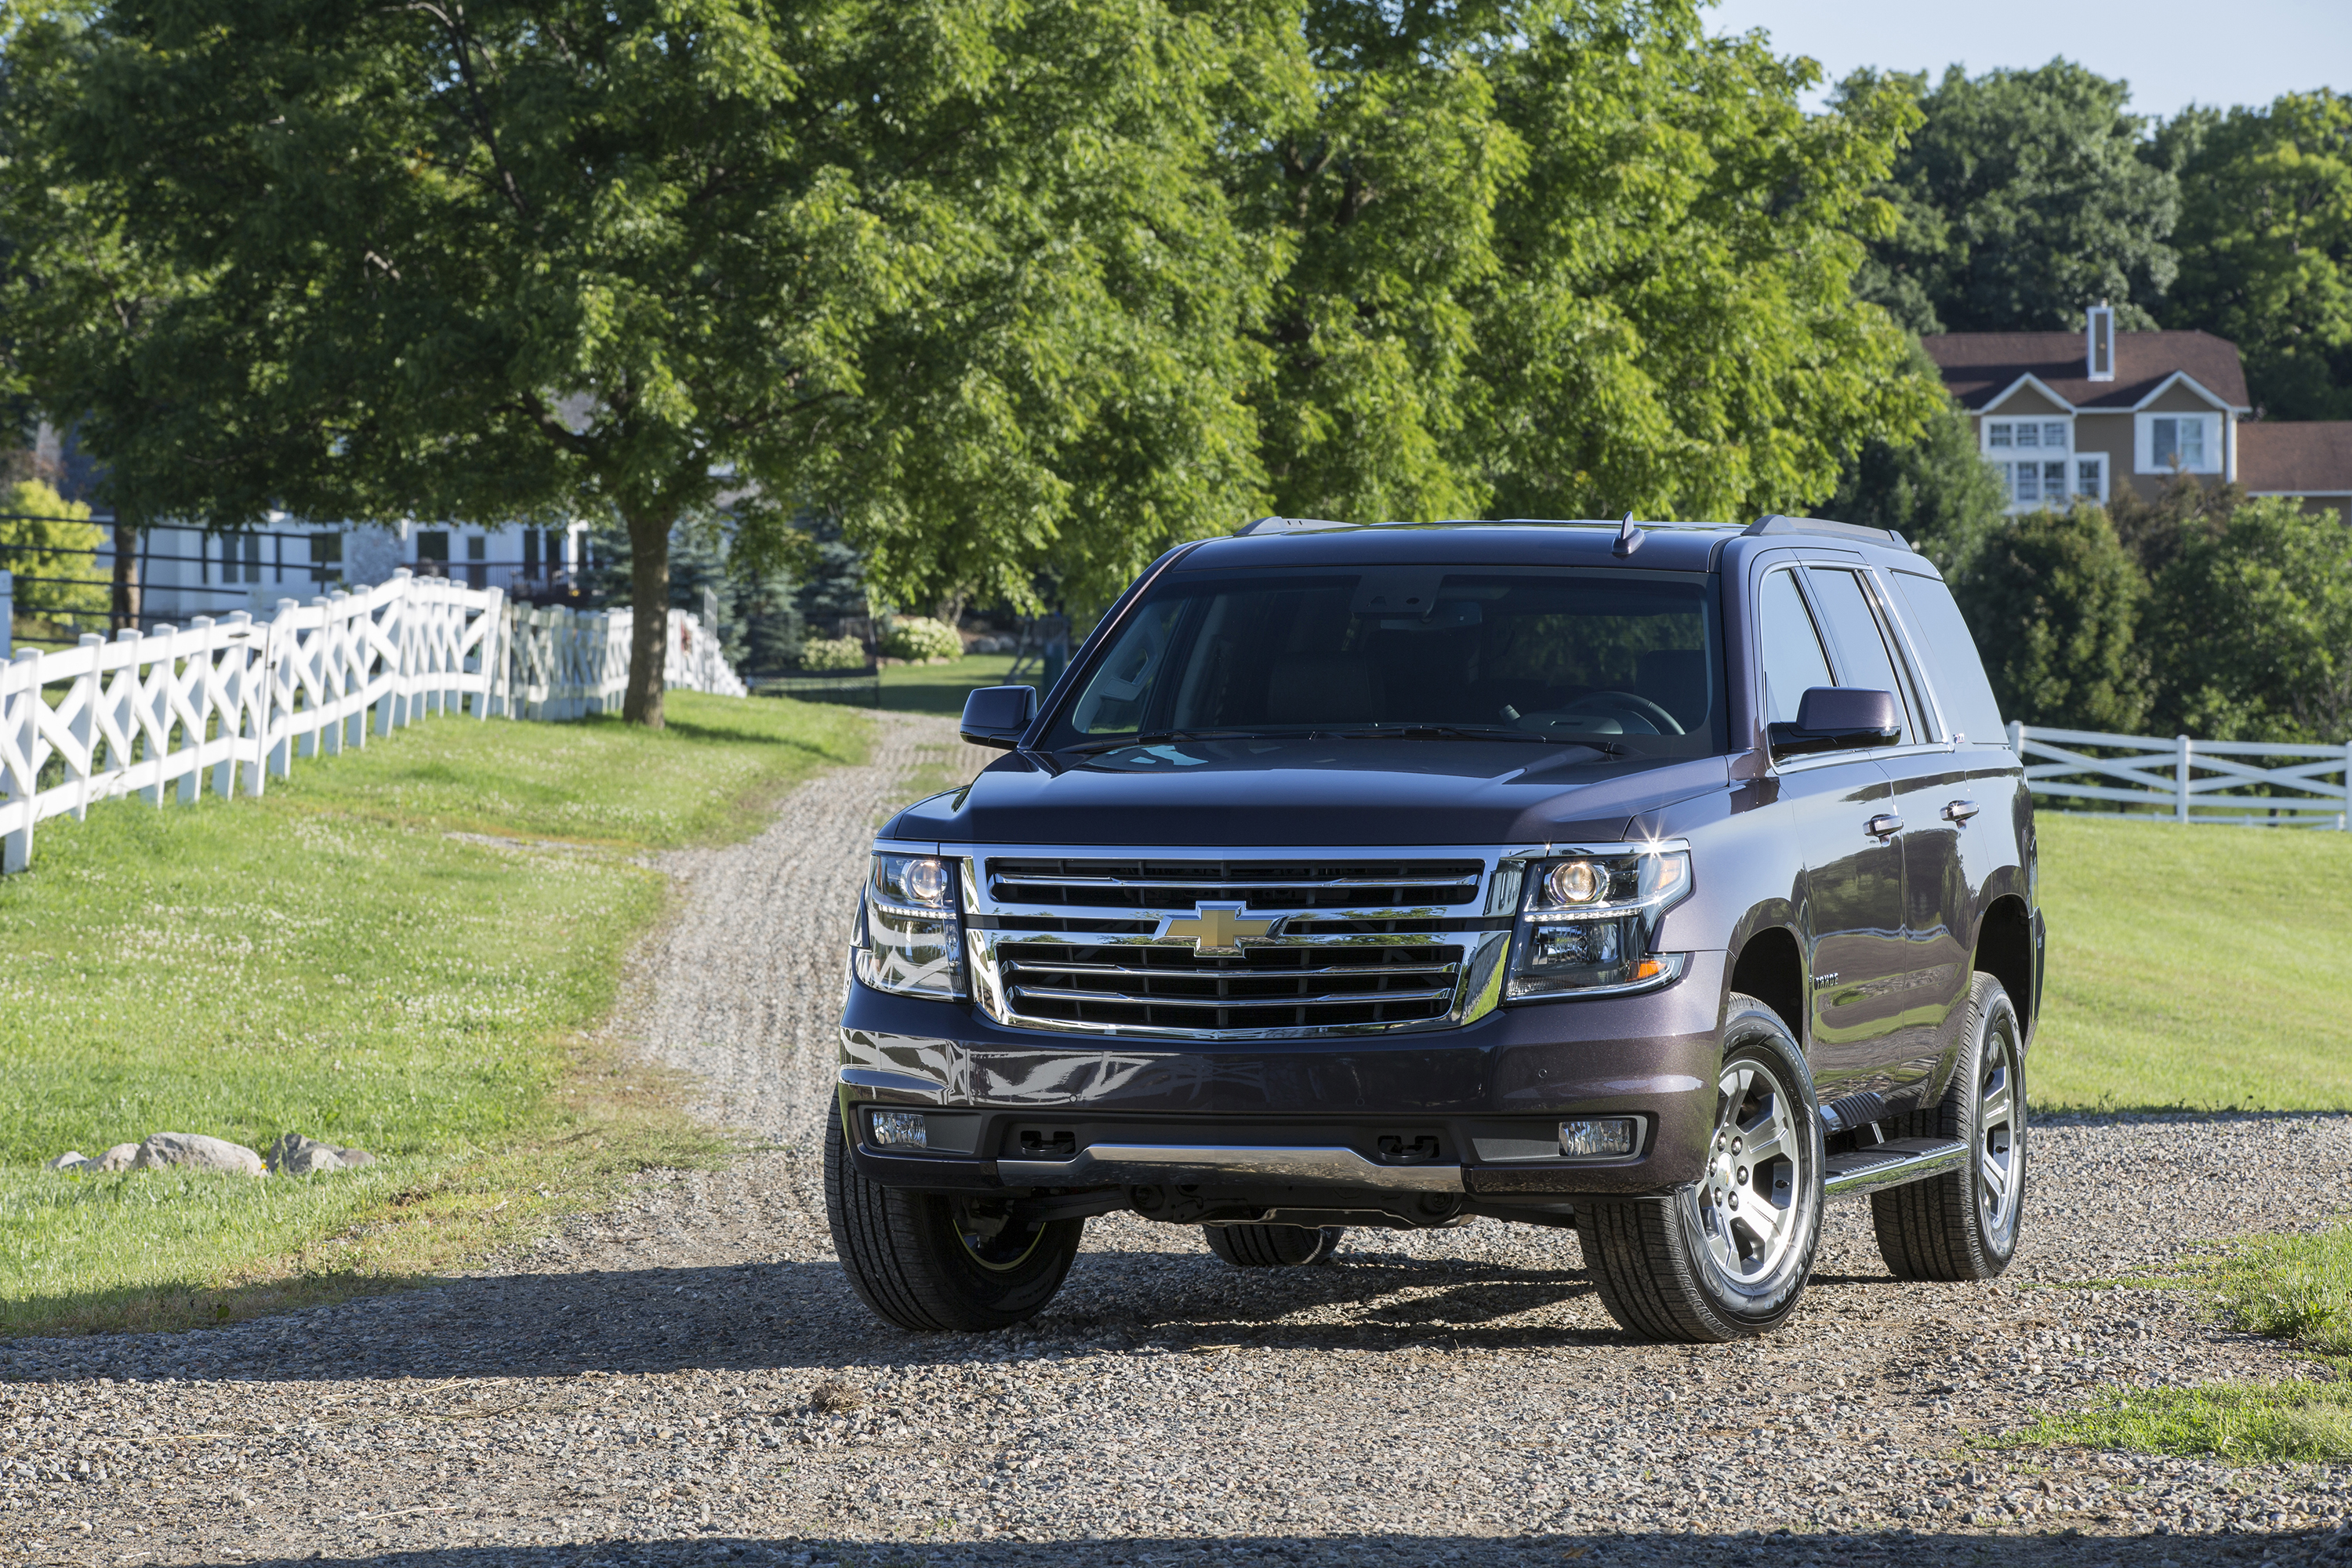 Chevrolet Tahoe hd specifications